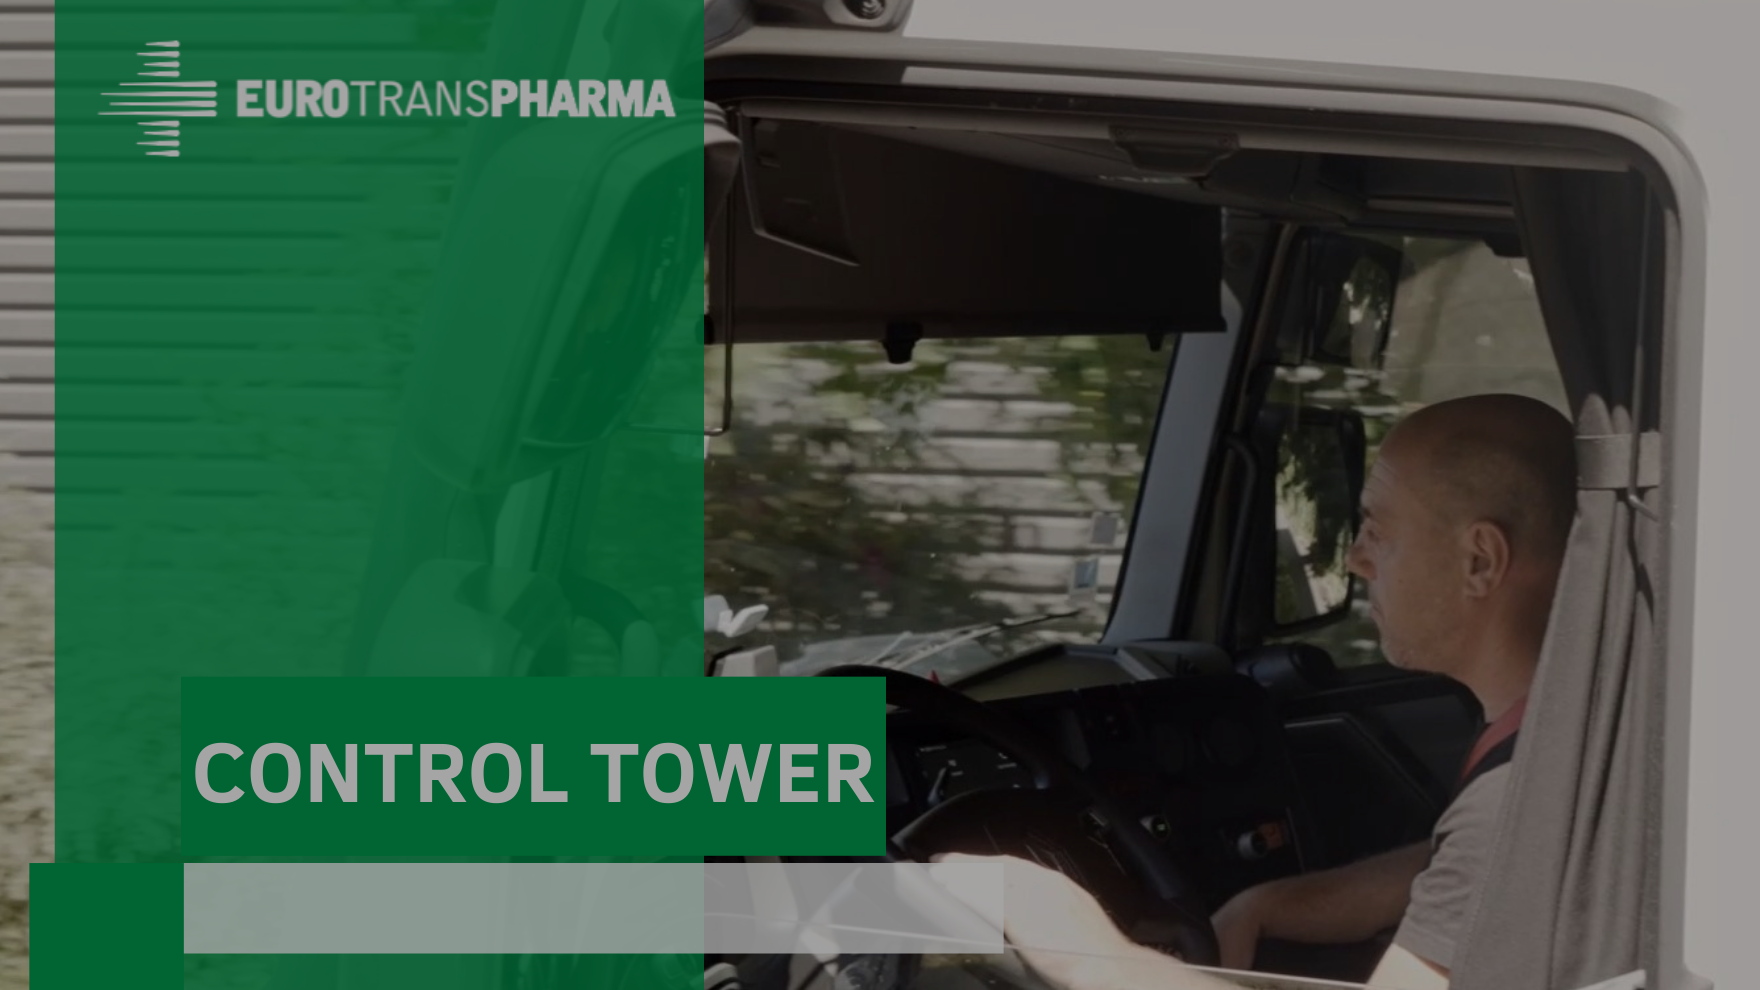 VIDEO – Eurotranspharma’s temperature control tower system